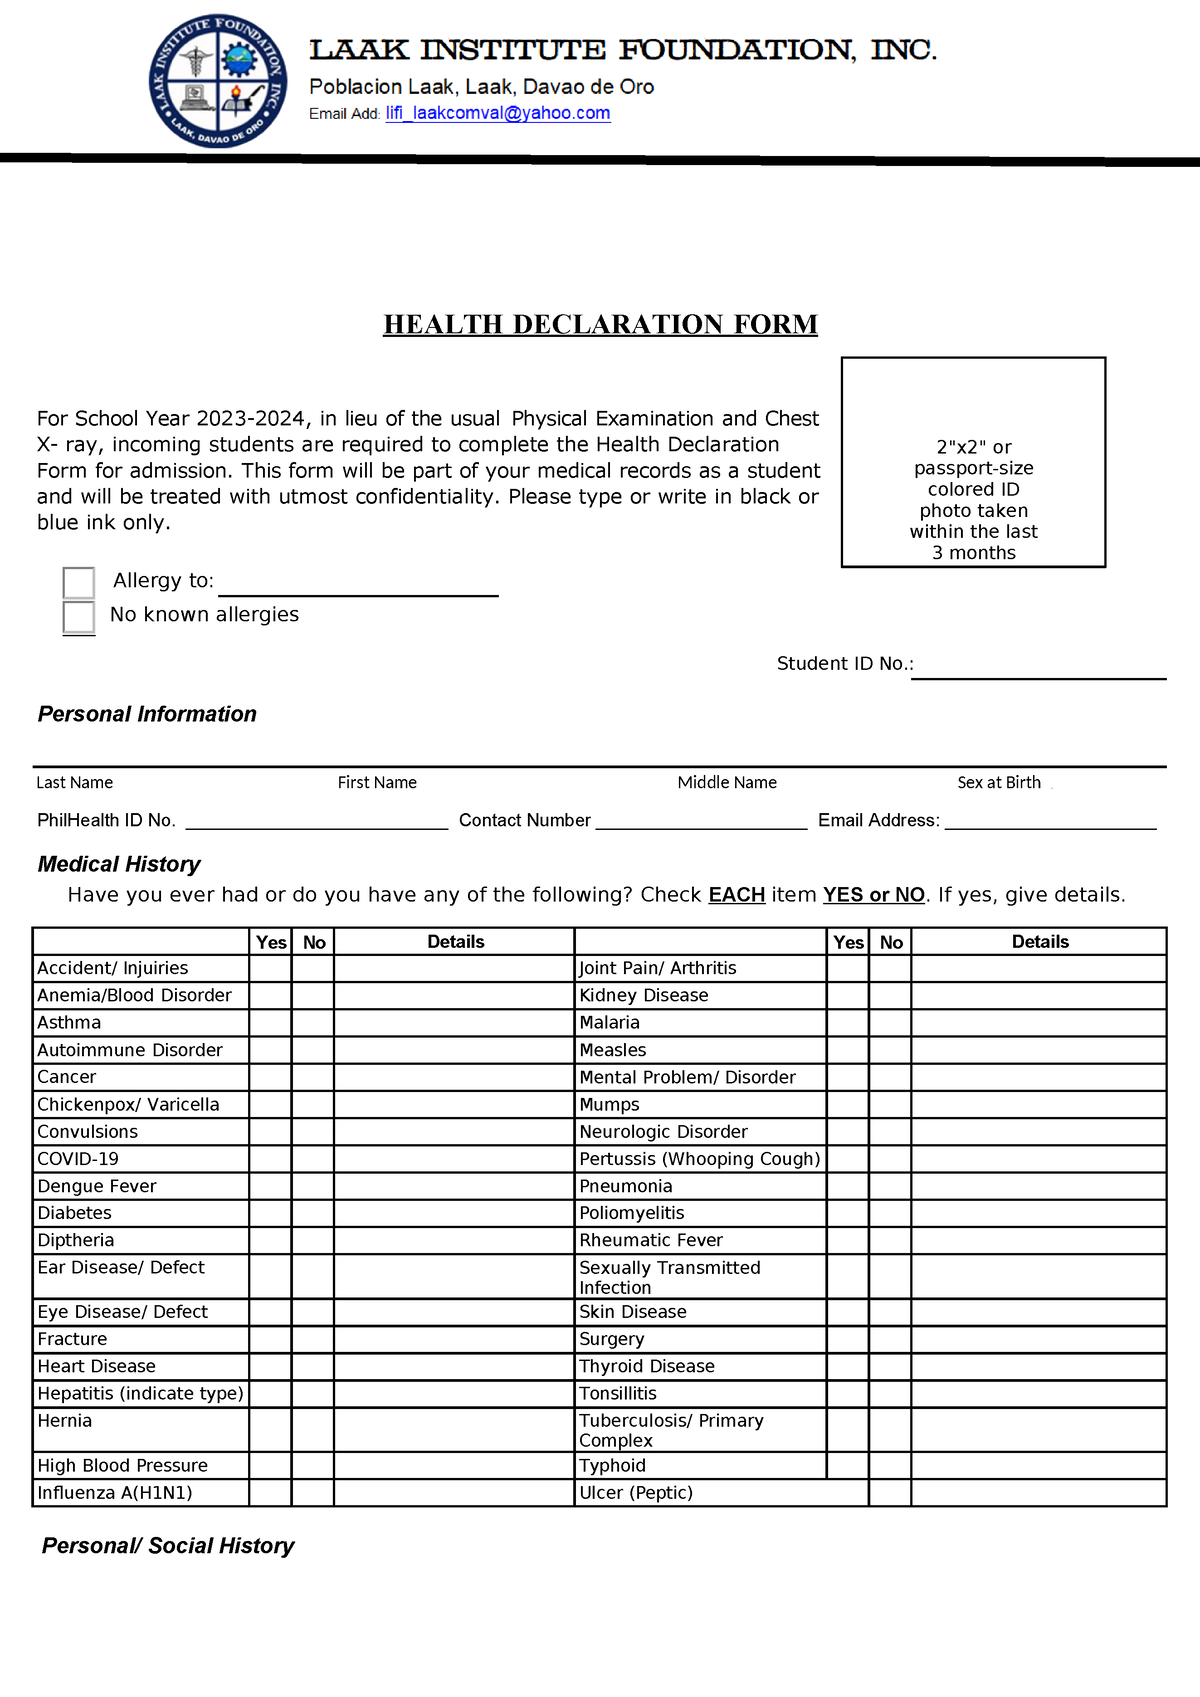 Health Declaration Form Gender Last Name First Name Middle Name Sex At Birth Health 4865